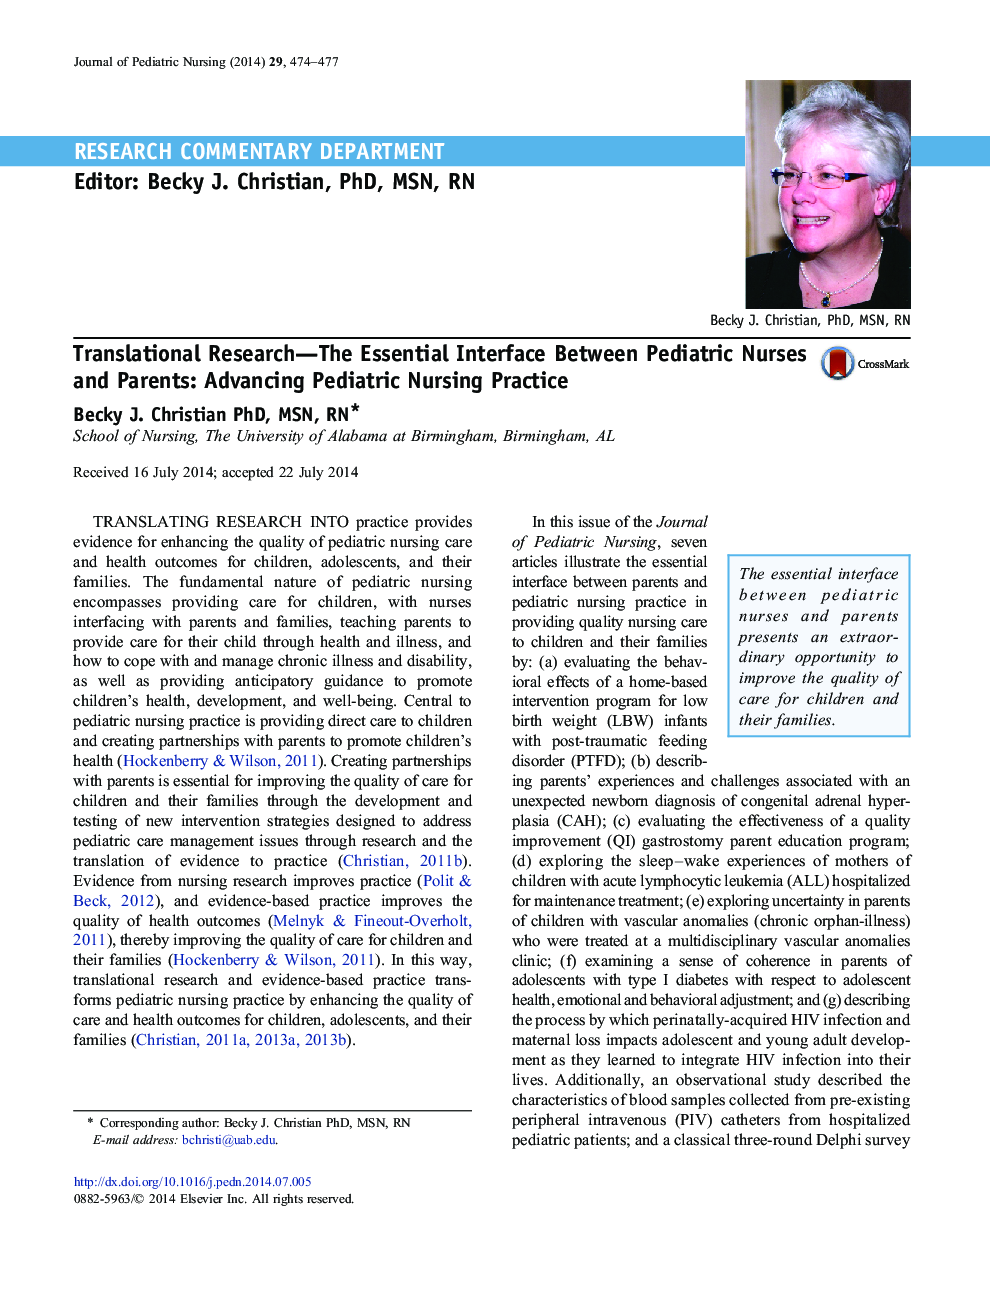 Translational Research-The Essential Interface Between Pediatric Nurses and Parents: Advancing Pediatric Nursing Practice